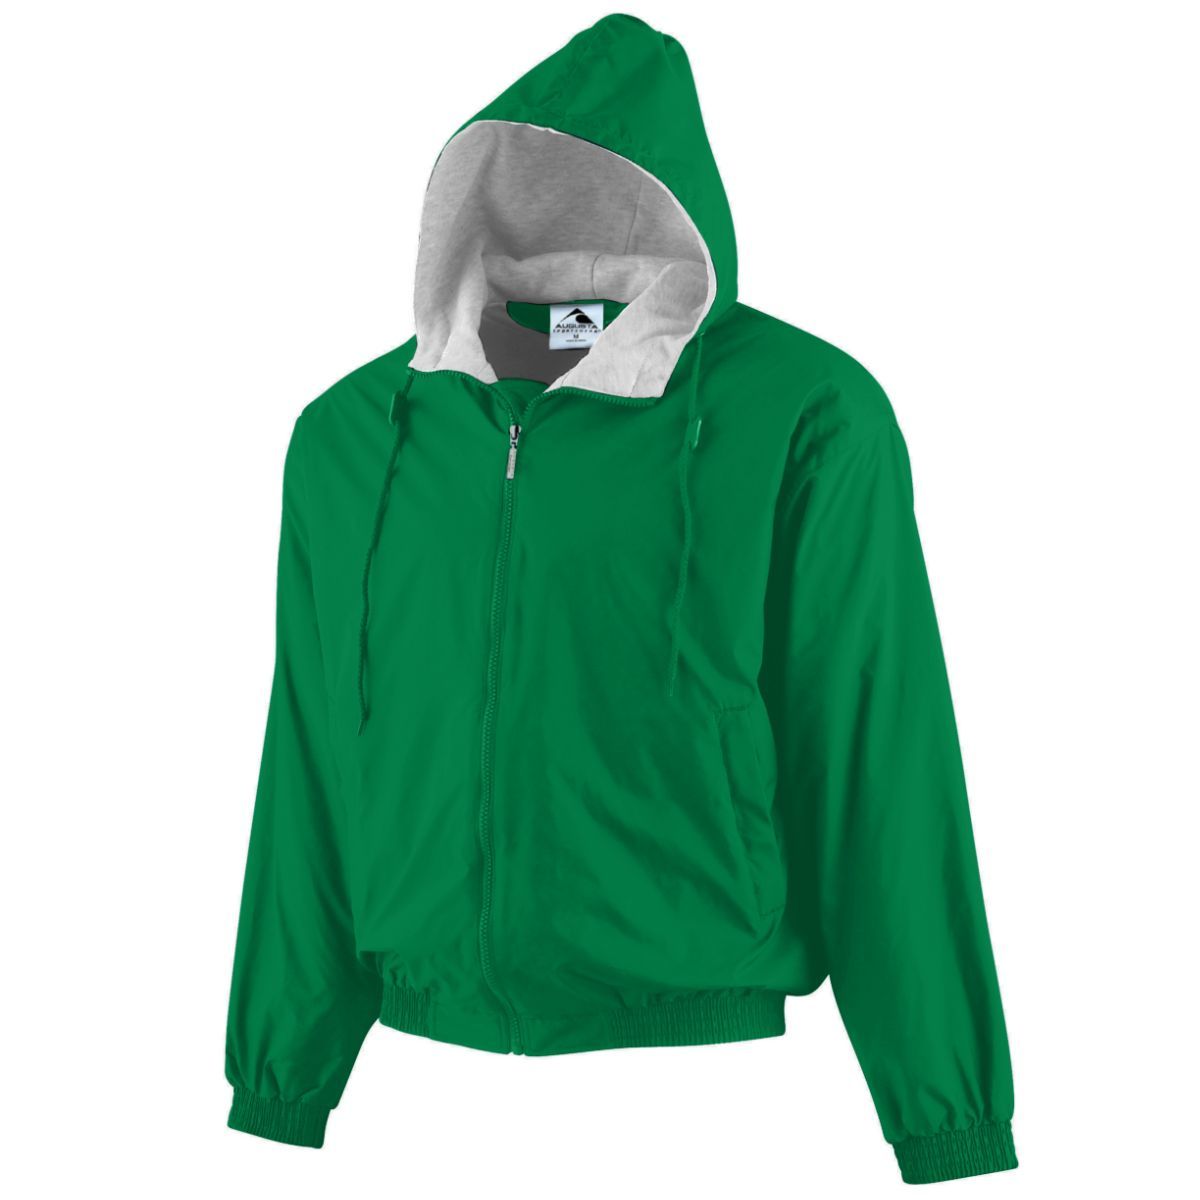 Augusta Sportswear Youth Hooded Taffeta Jacket/Fleece Lined in Kelly  -Part of the Youth, Youth-Jacket, Augusta-Products, Outerwear product lines at KanaleyCreations.com